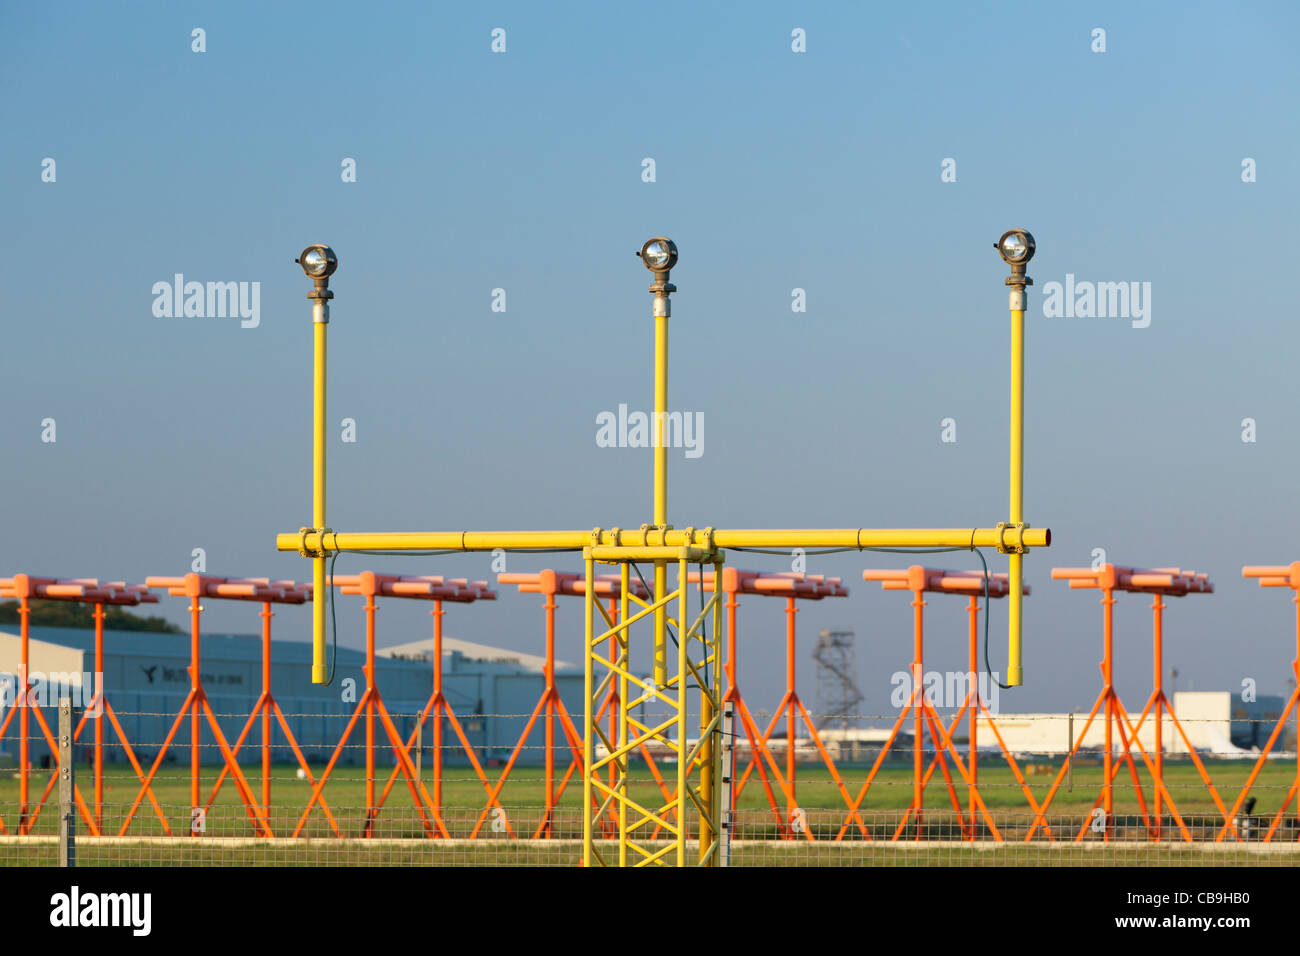 Runway approach lights at a UK airport Stock Photo - Alamy